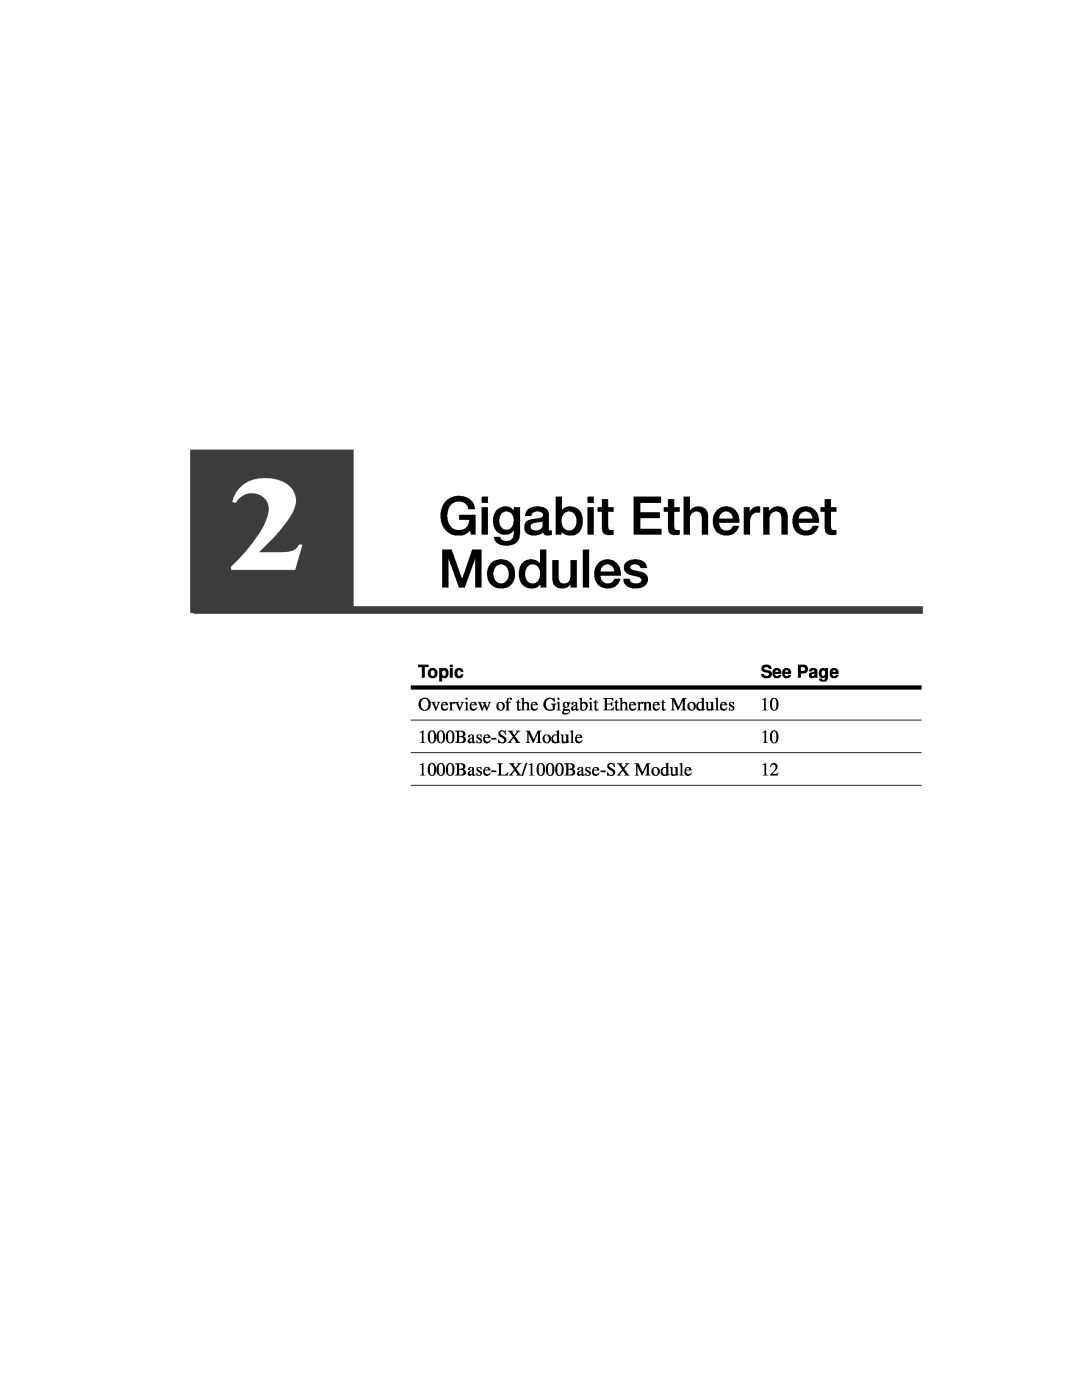 Intel A21721-001 manual Overview of the Gigabit Ethernet Modules, 1000Base-LX/1000Base-SX Module, Topic, See Page 